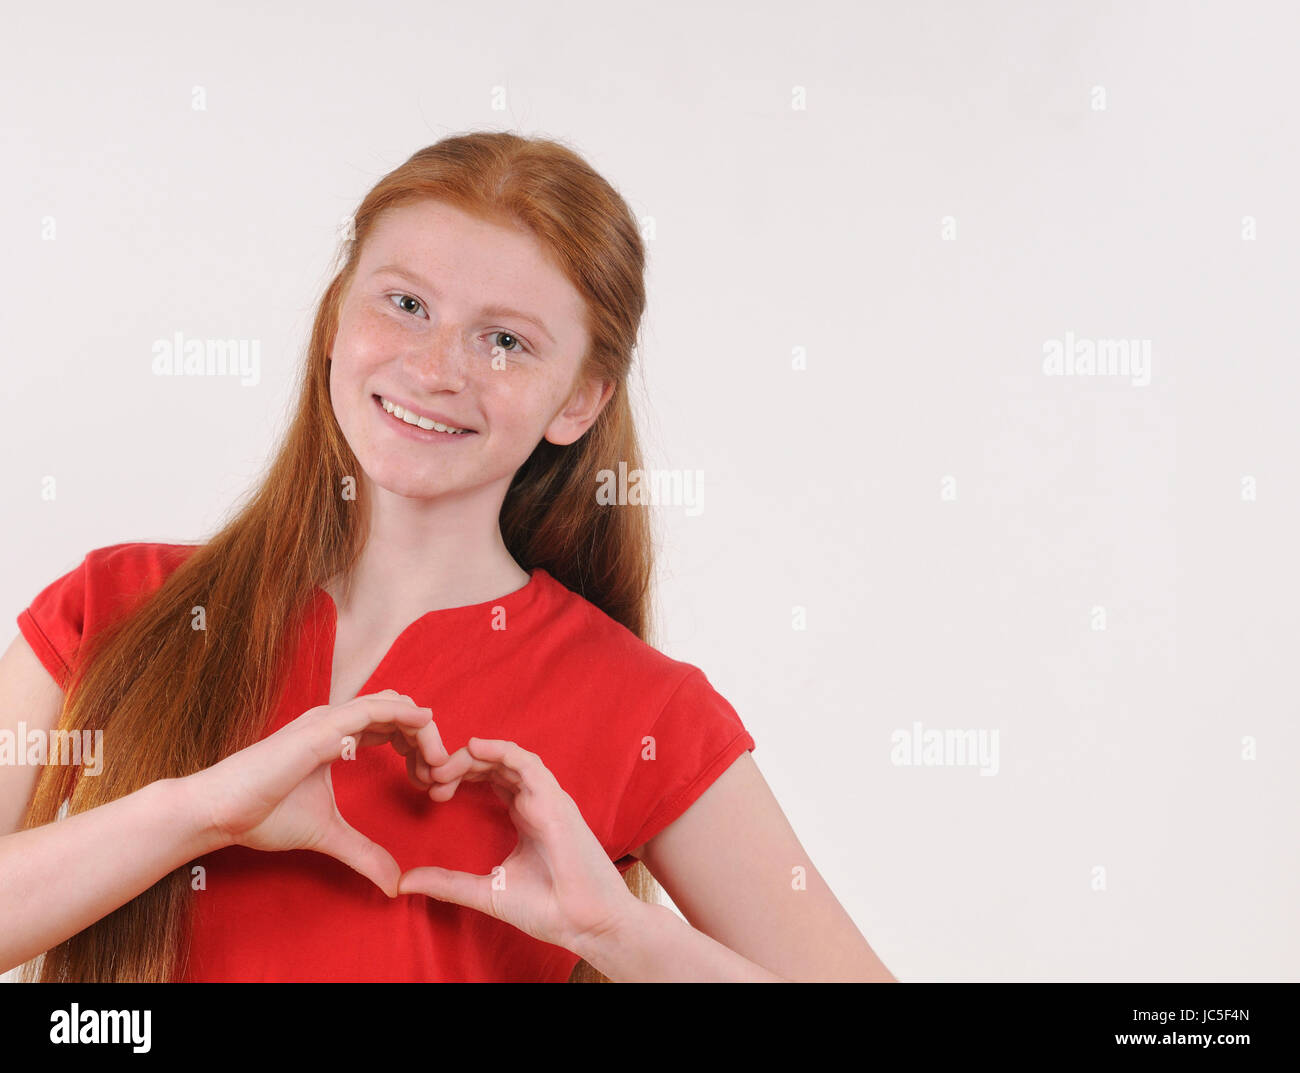 Portrait of a young red hair girl showing heart shape with hands on grey background. Happy smiling lifestyle people concept. Human emotions. Stock Photo